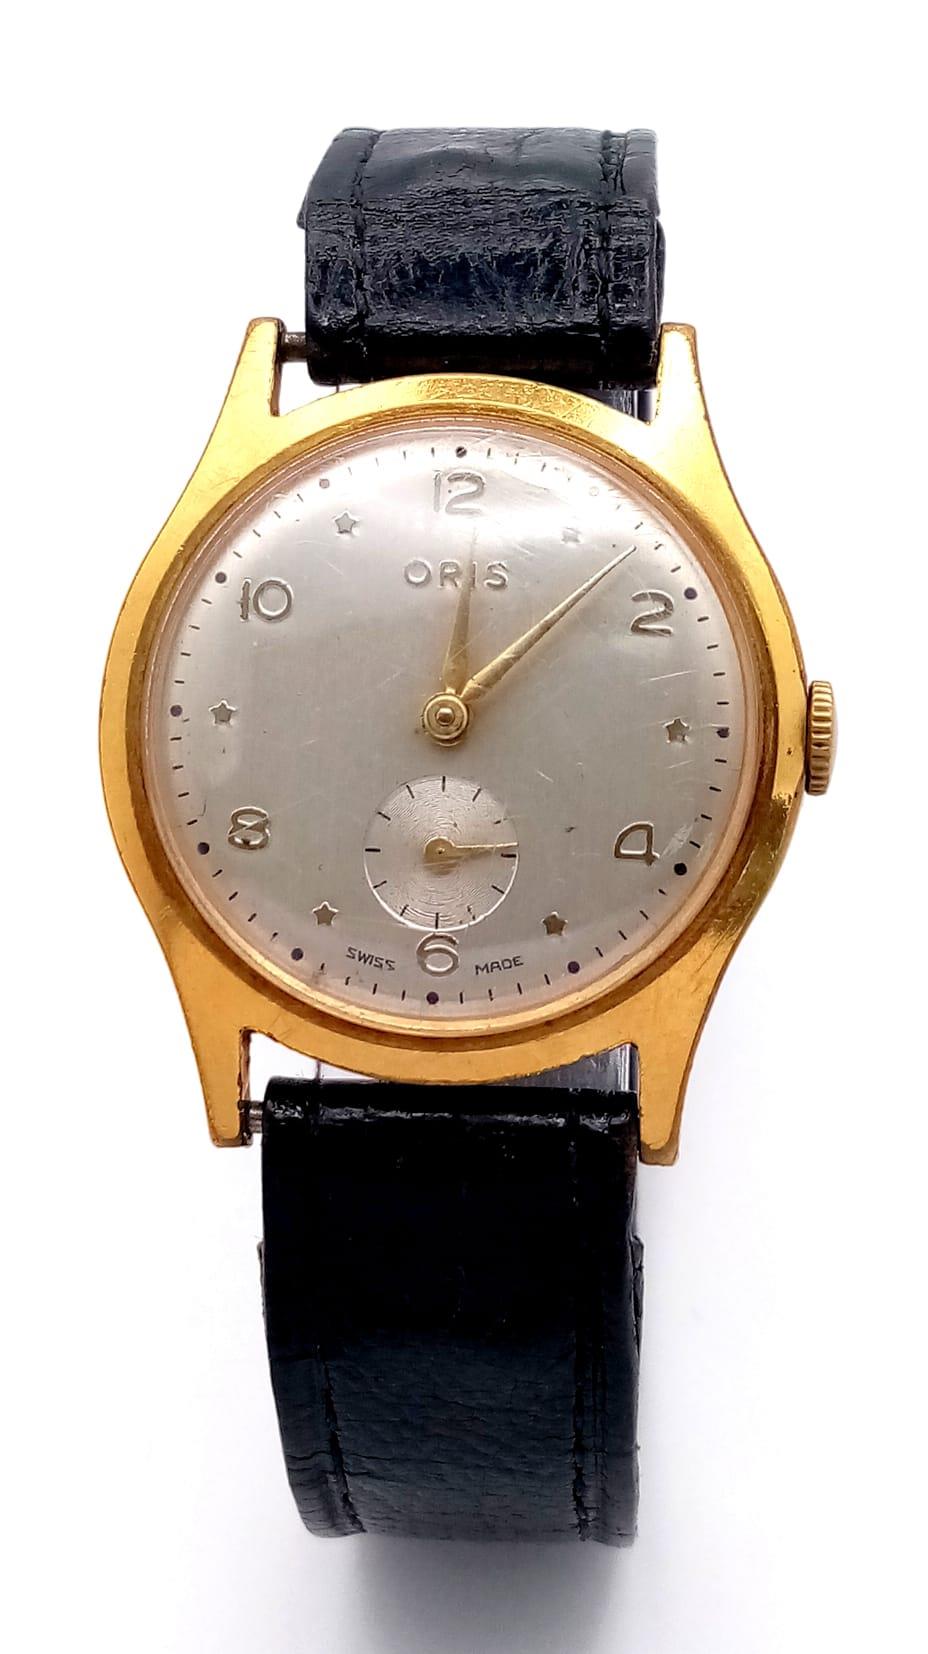 A Vintage Oris Mechanical Gents Watch. Black leather strap. Two tone case - 33mm. Silver tone dial - Image 3 of 6